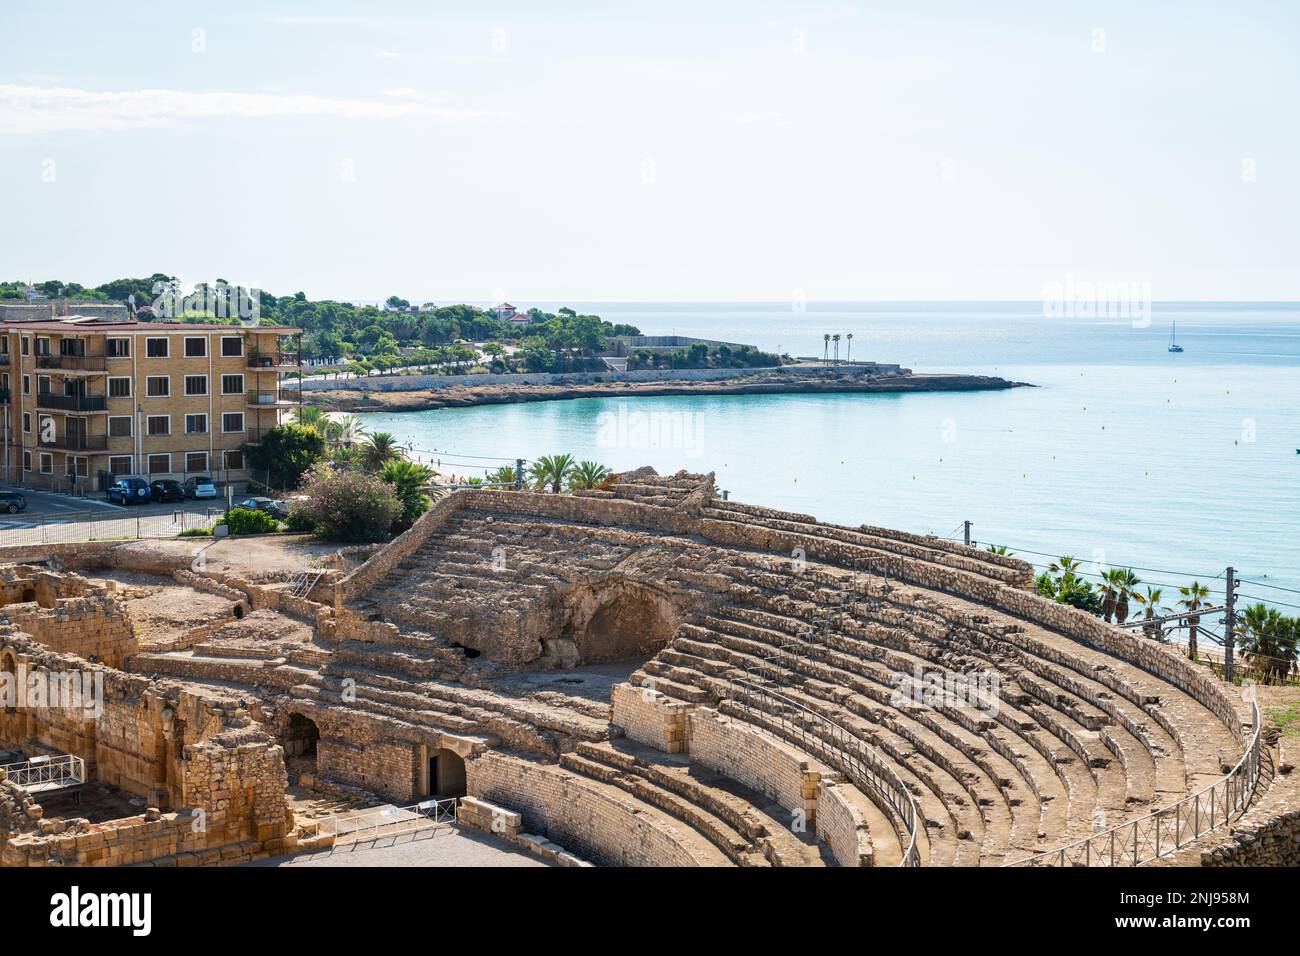 Wide-angle view of the ruins of the Roman amphitheater in Tarragona, built in the 2nd century AD, with the Mediterranean Sea in the background. Stock Photo